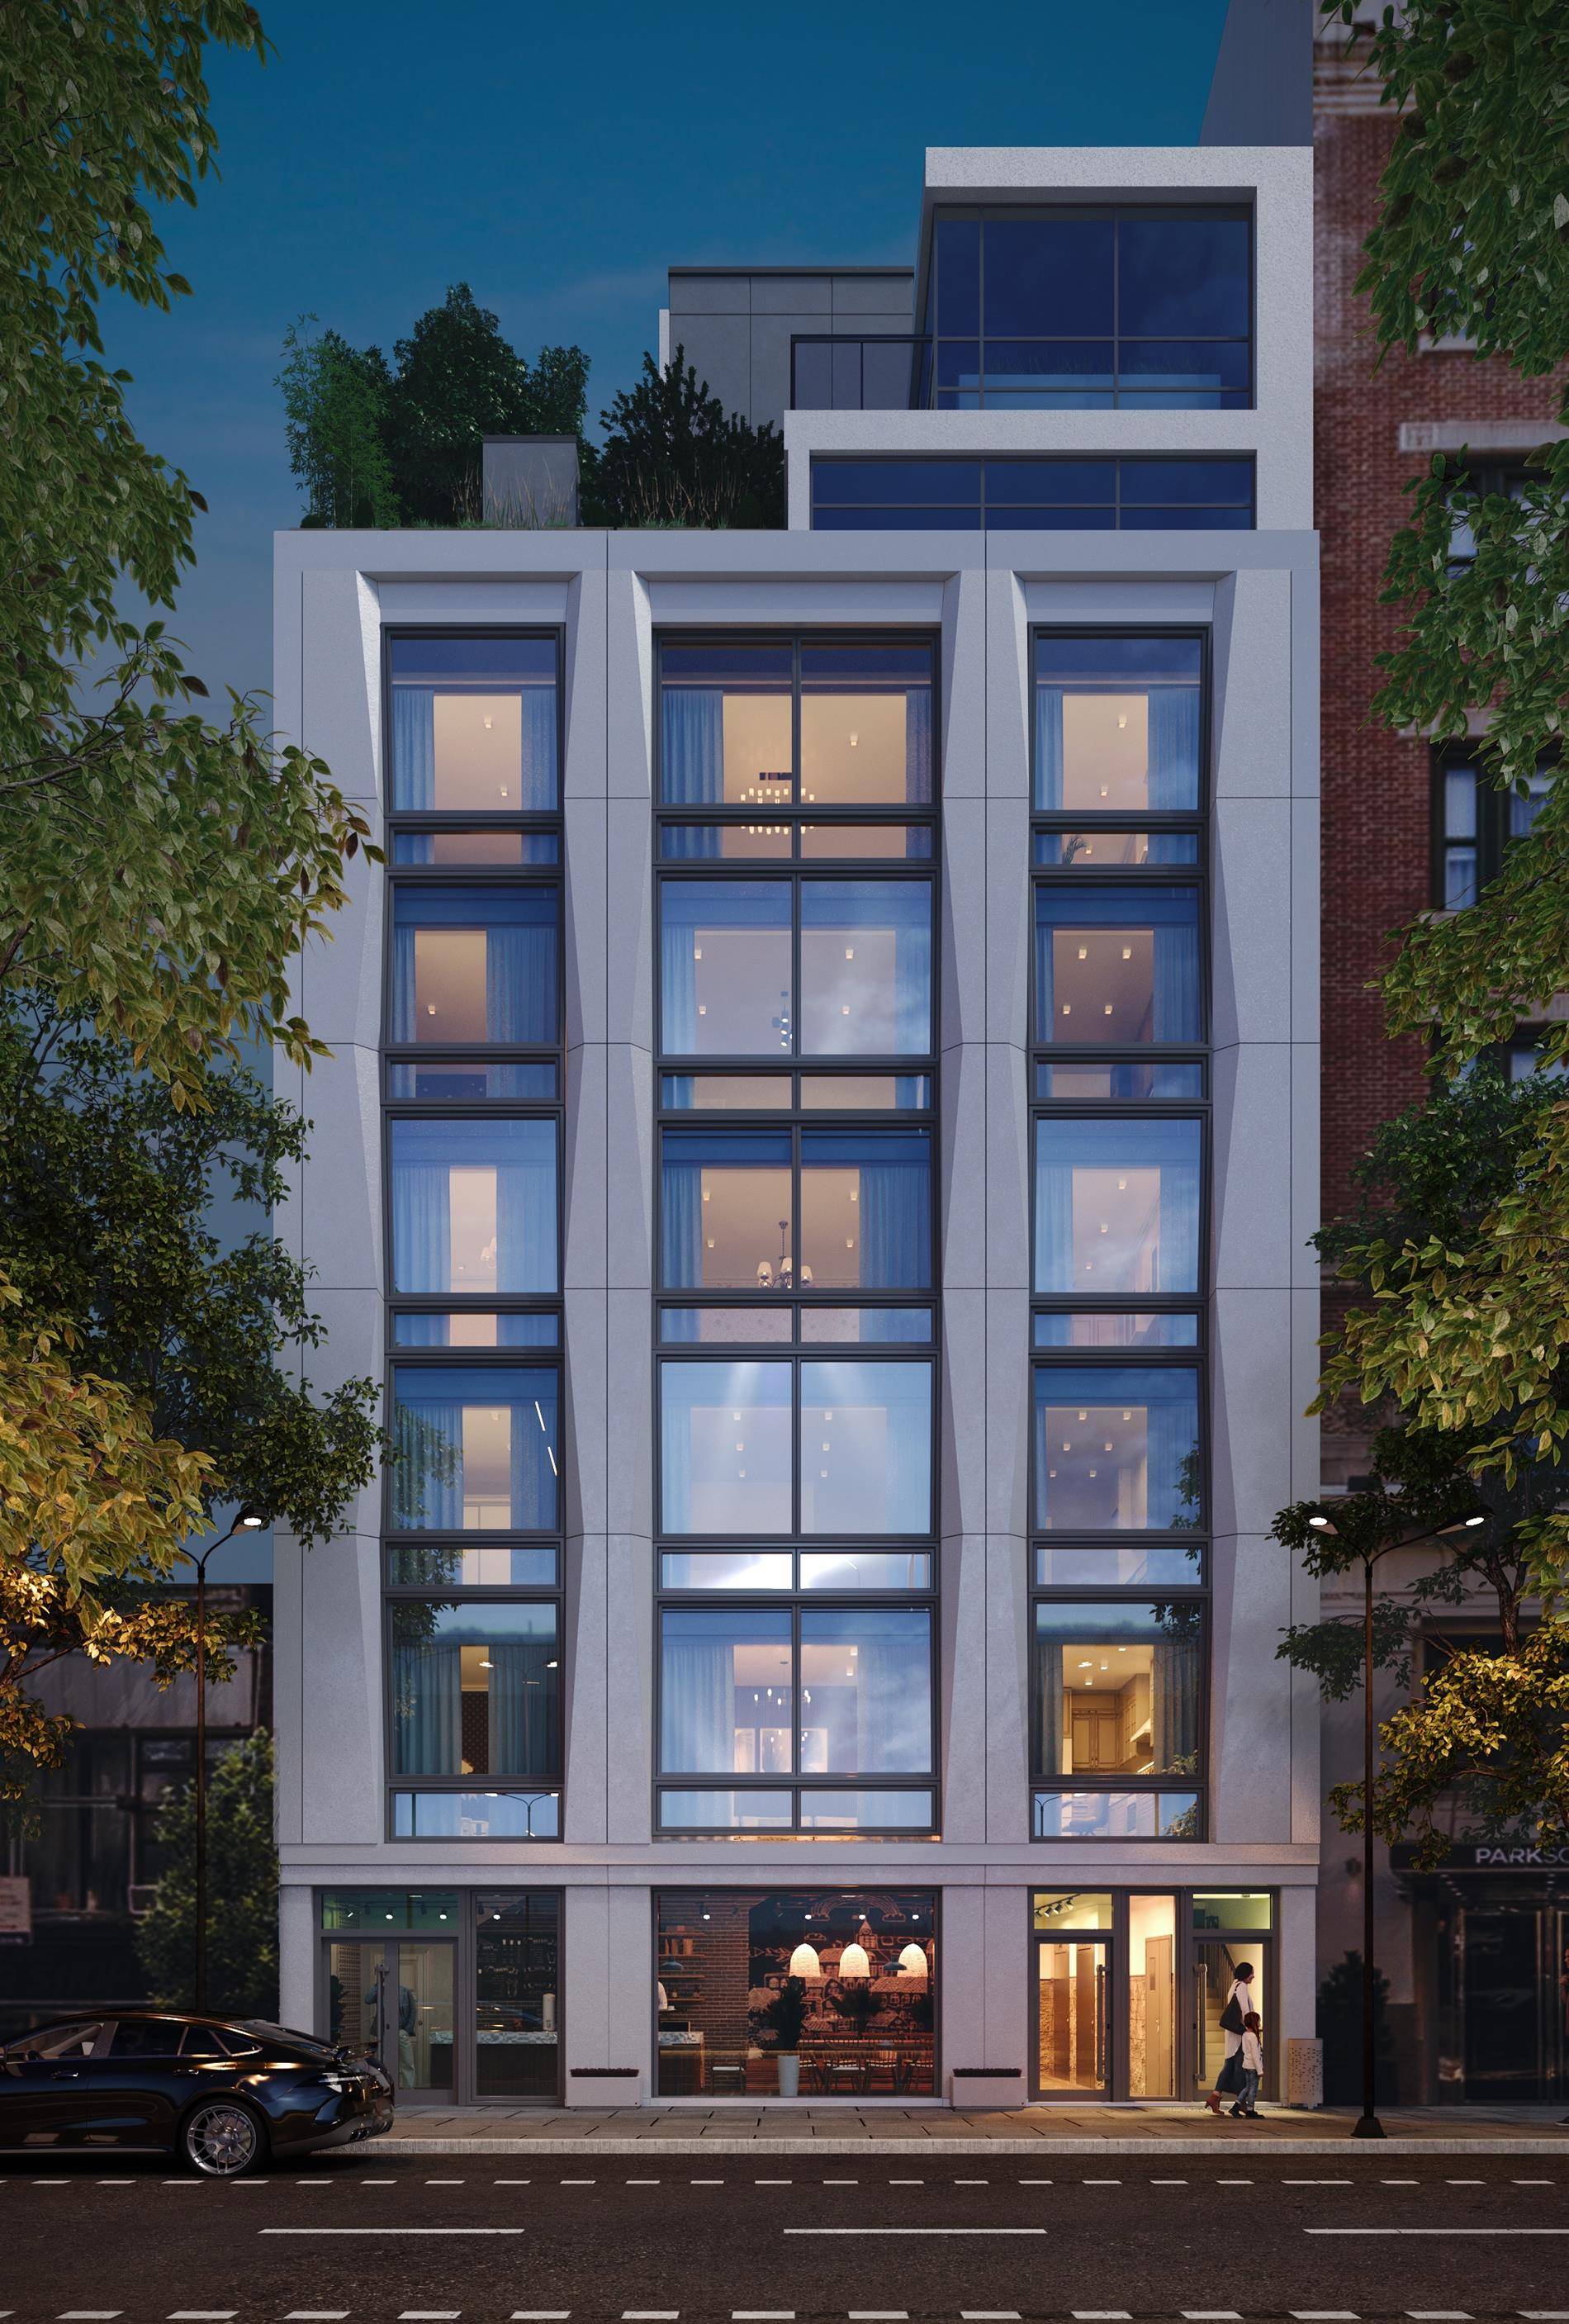 Introducing this brand new floor through condo where residents enjoy a private balcony, contemporary finishes, thoughtful tech and wellness features, low monthlies, and an exciting NoMad address close to restaurants, ...